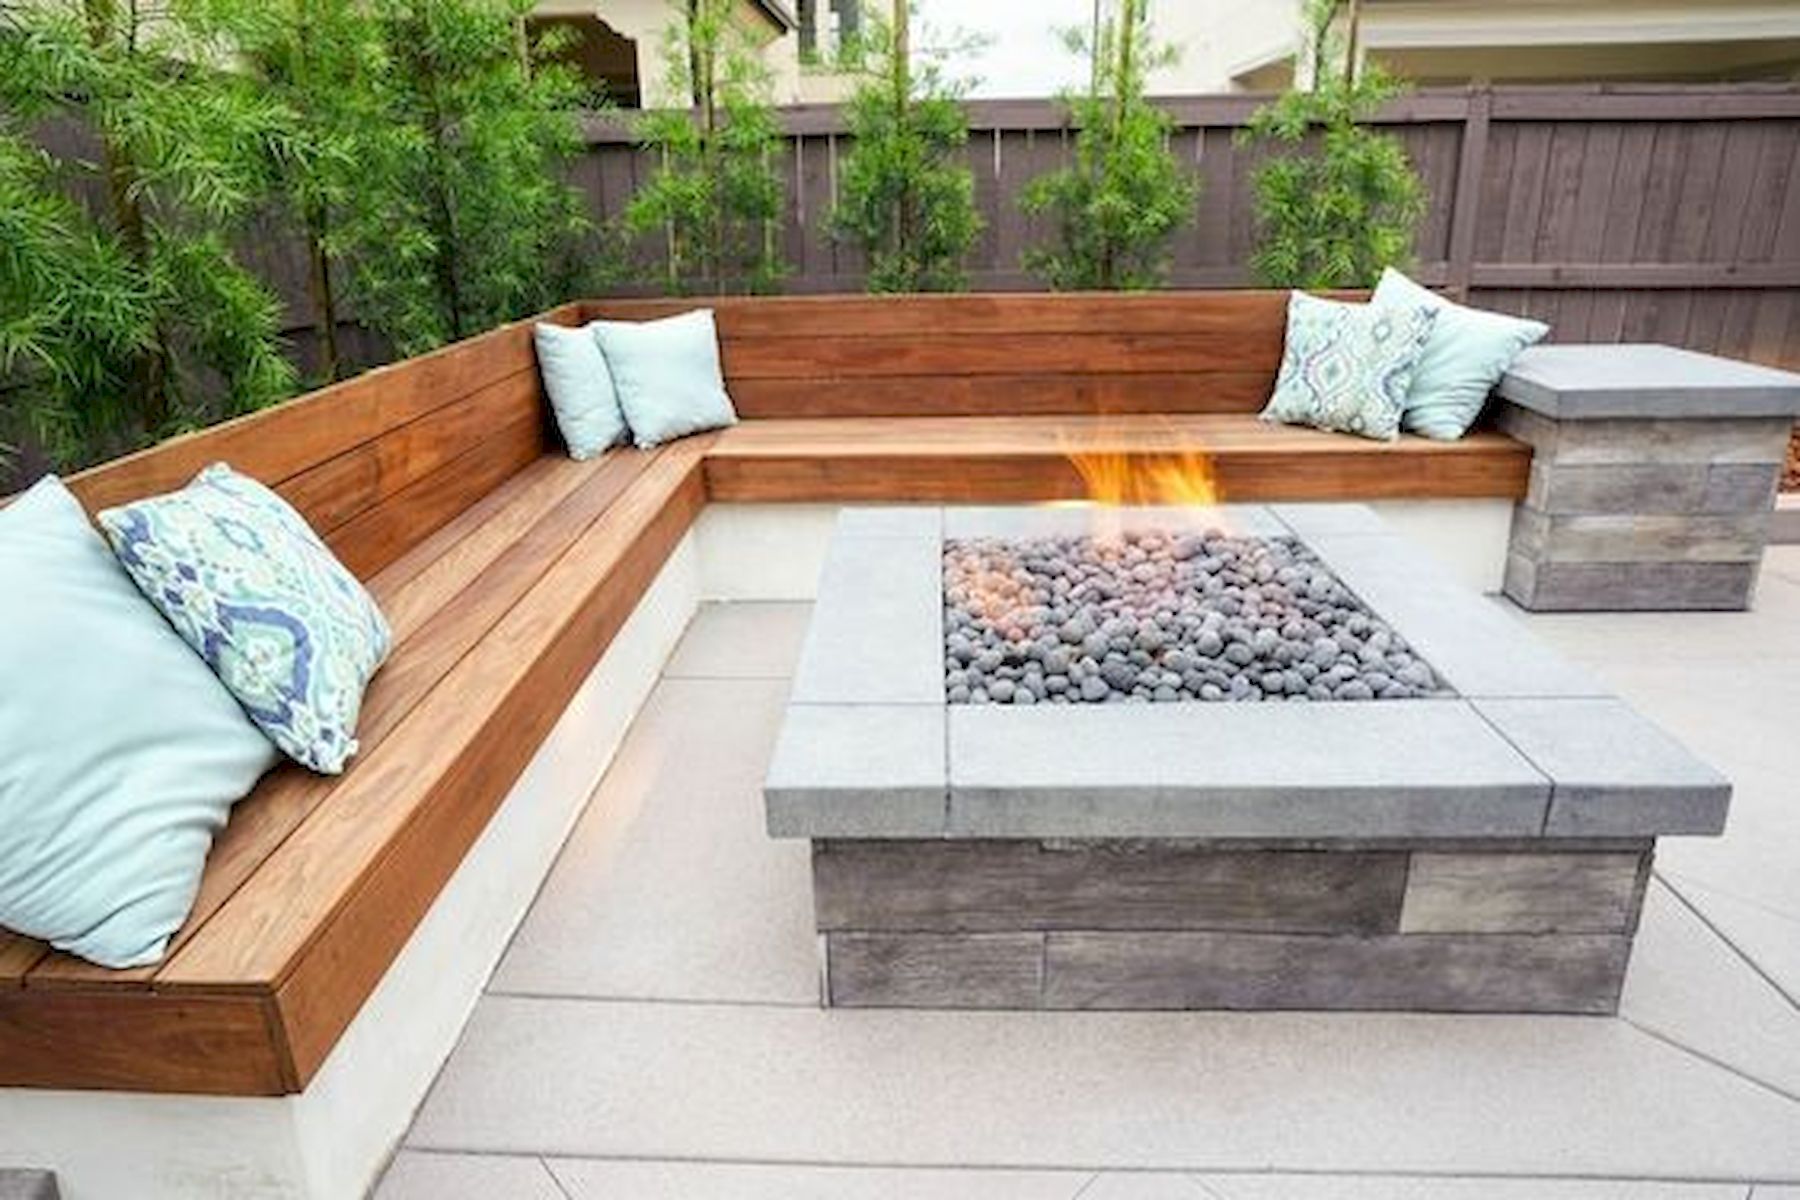 55 Awesome Backyard Fire Pit Ideas For Comfortable Relax (1)